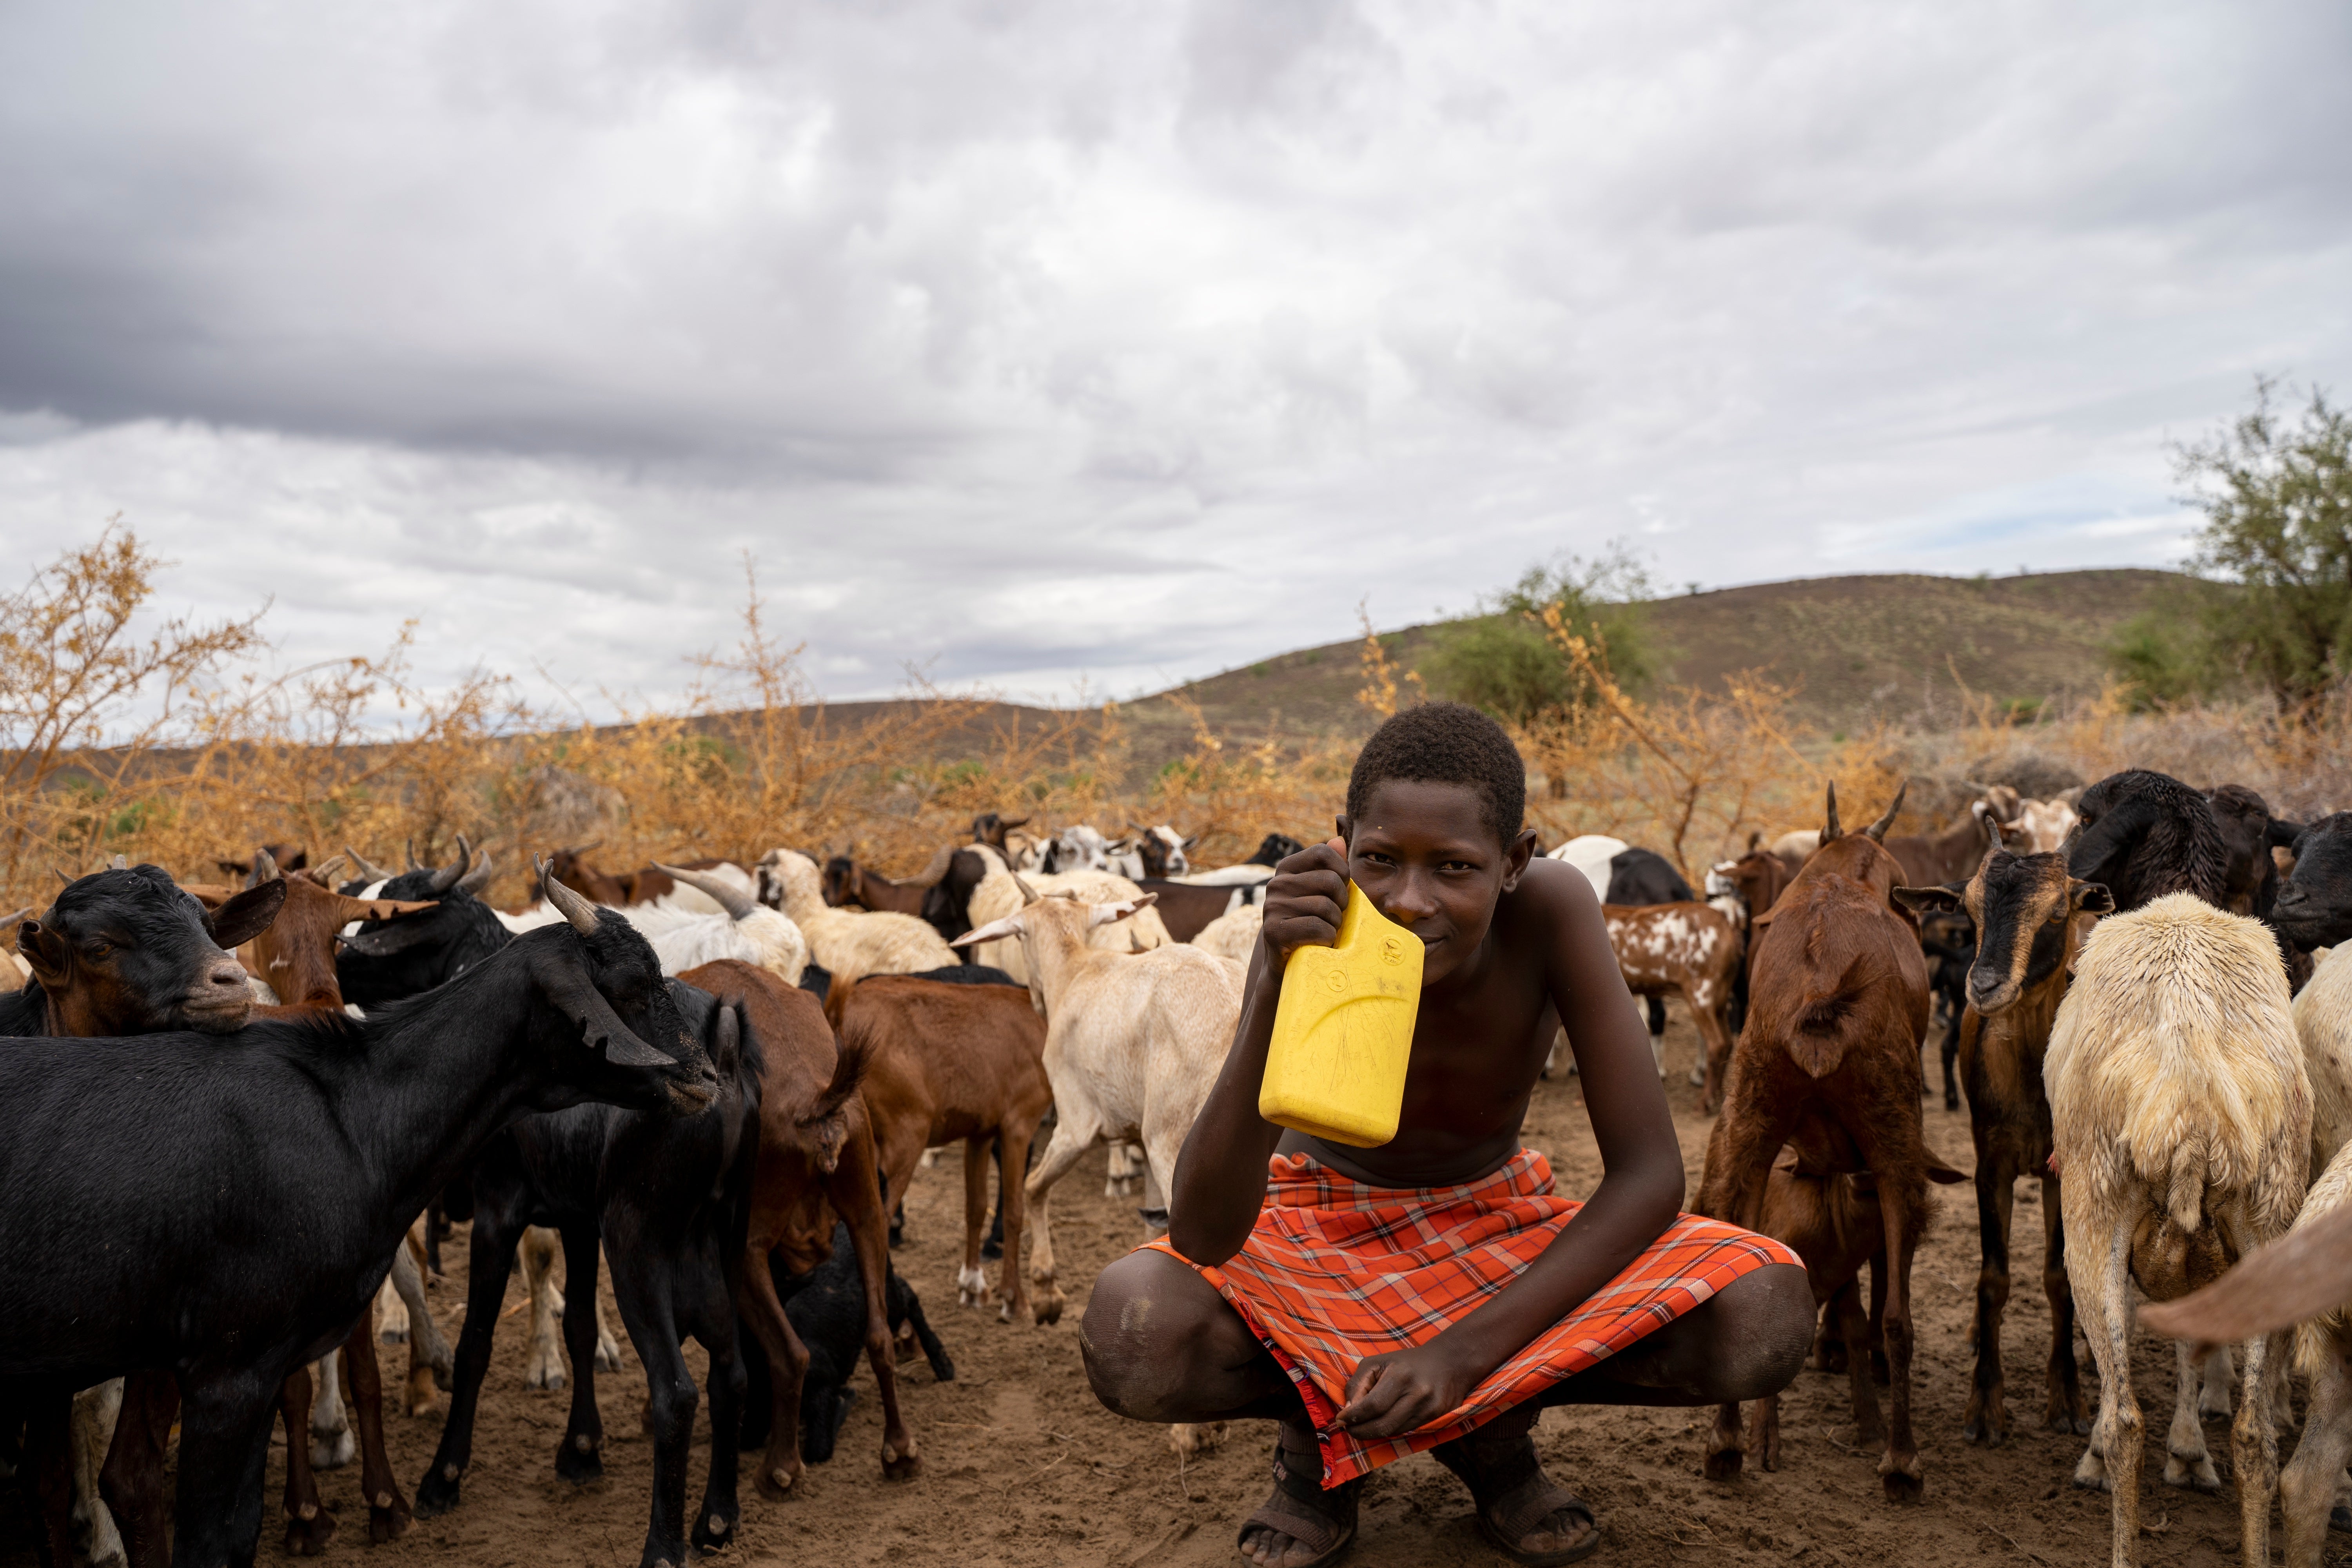 Lolampa, a Turkana herder, with his goats and sheep